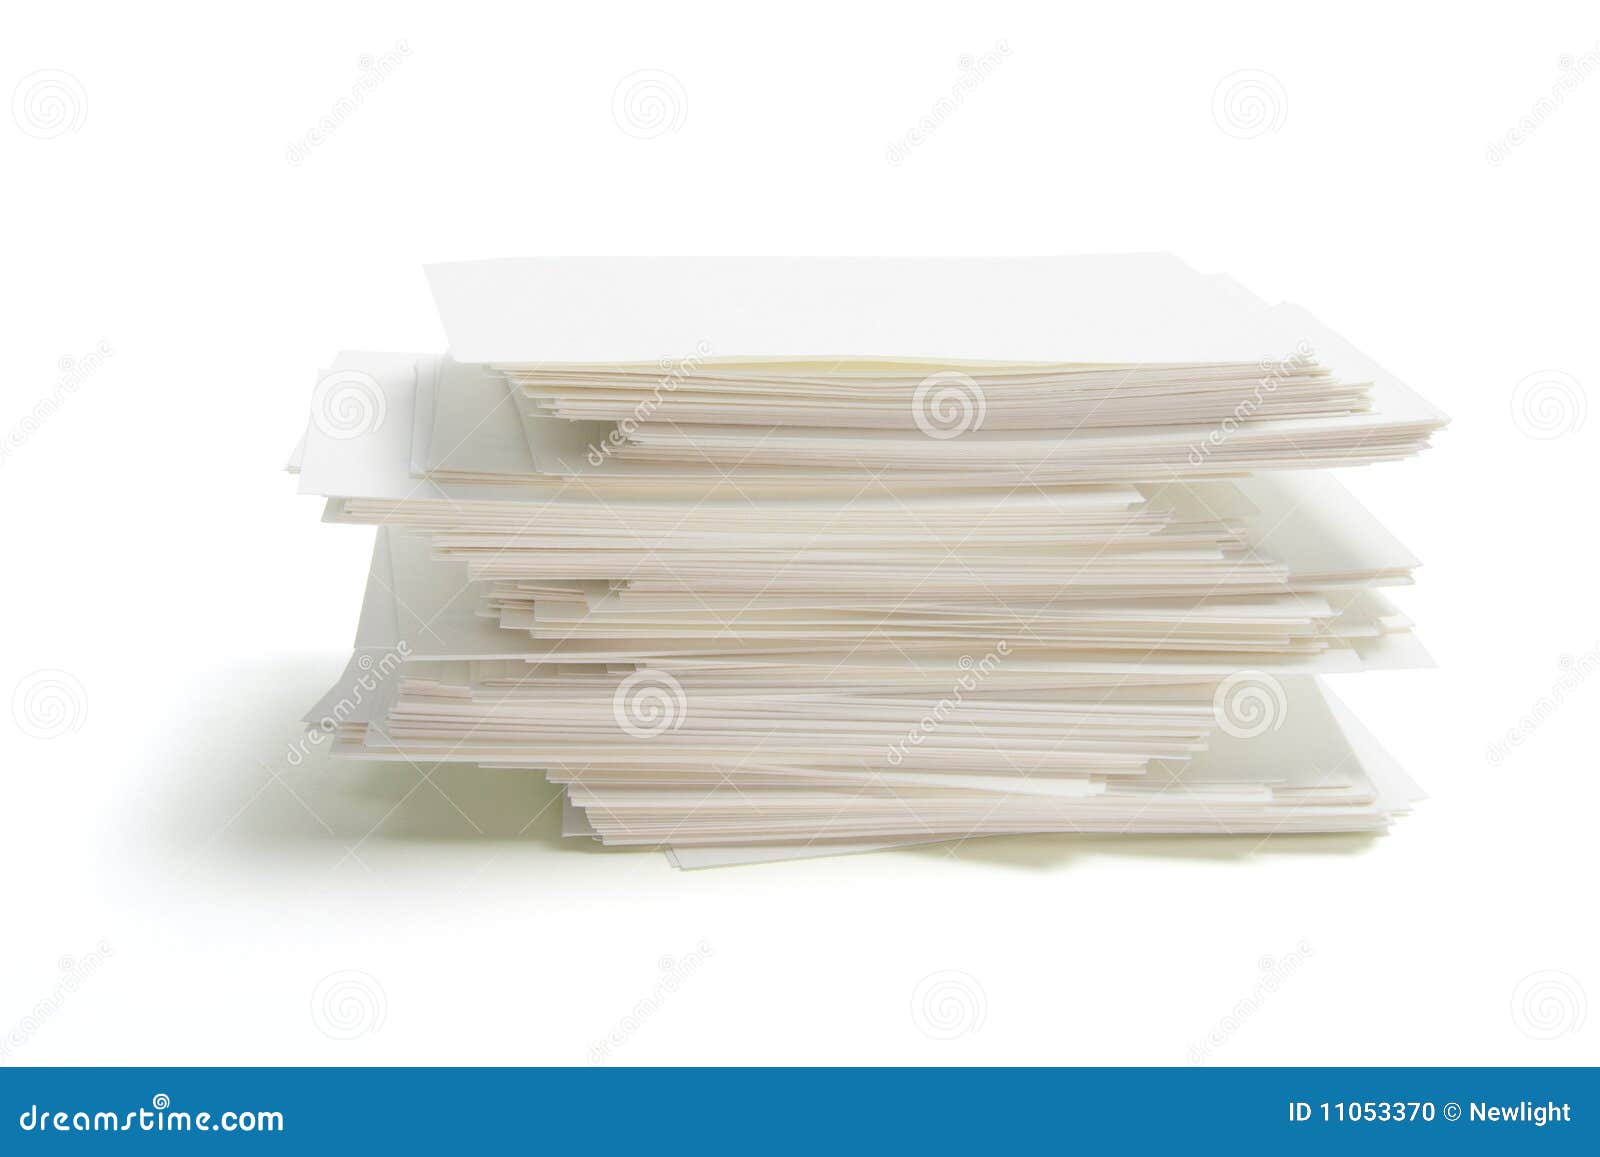 More similar stock images of ` Stack of Blank Name Cards `